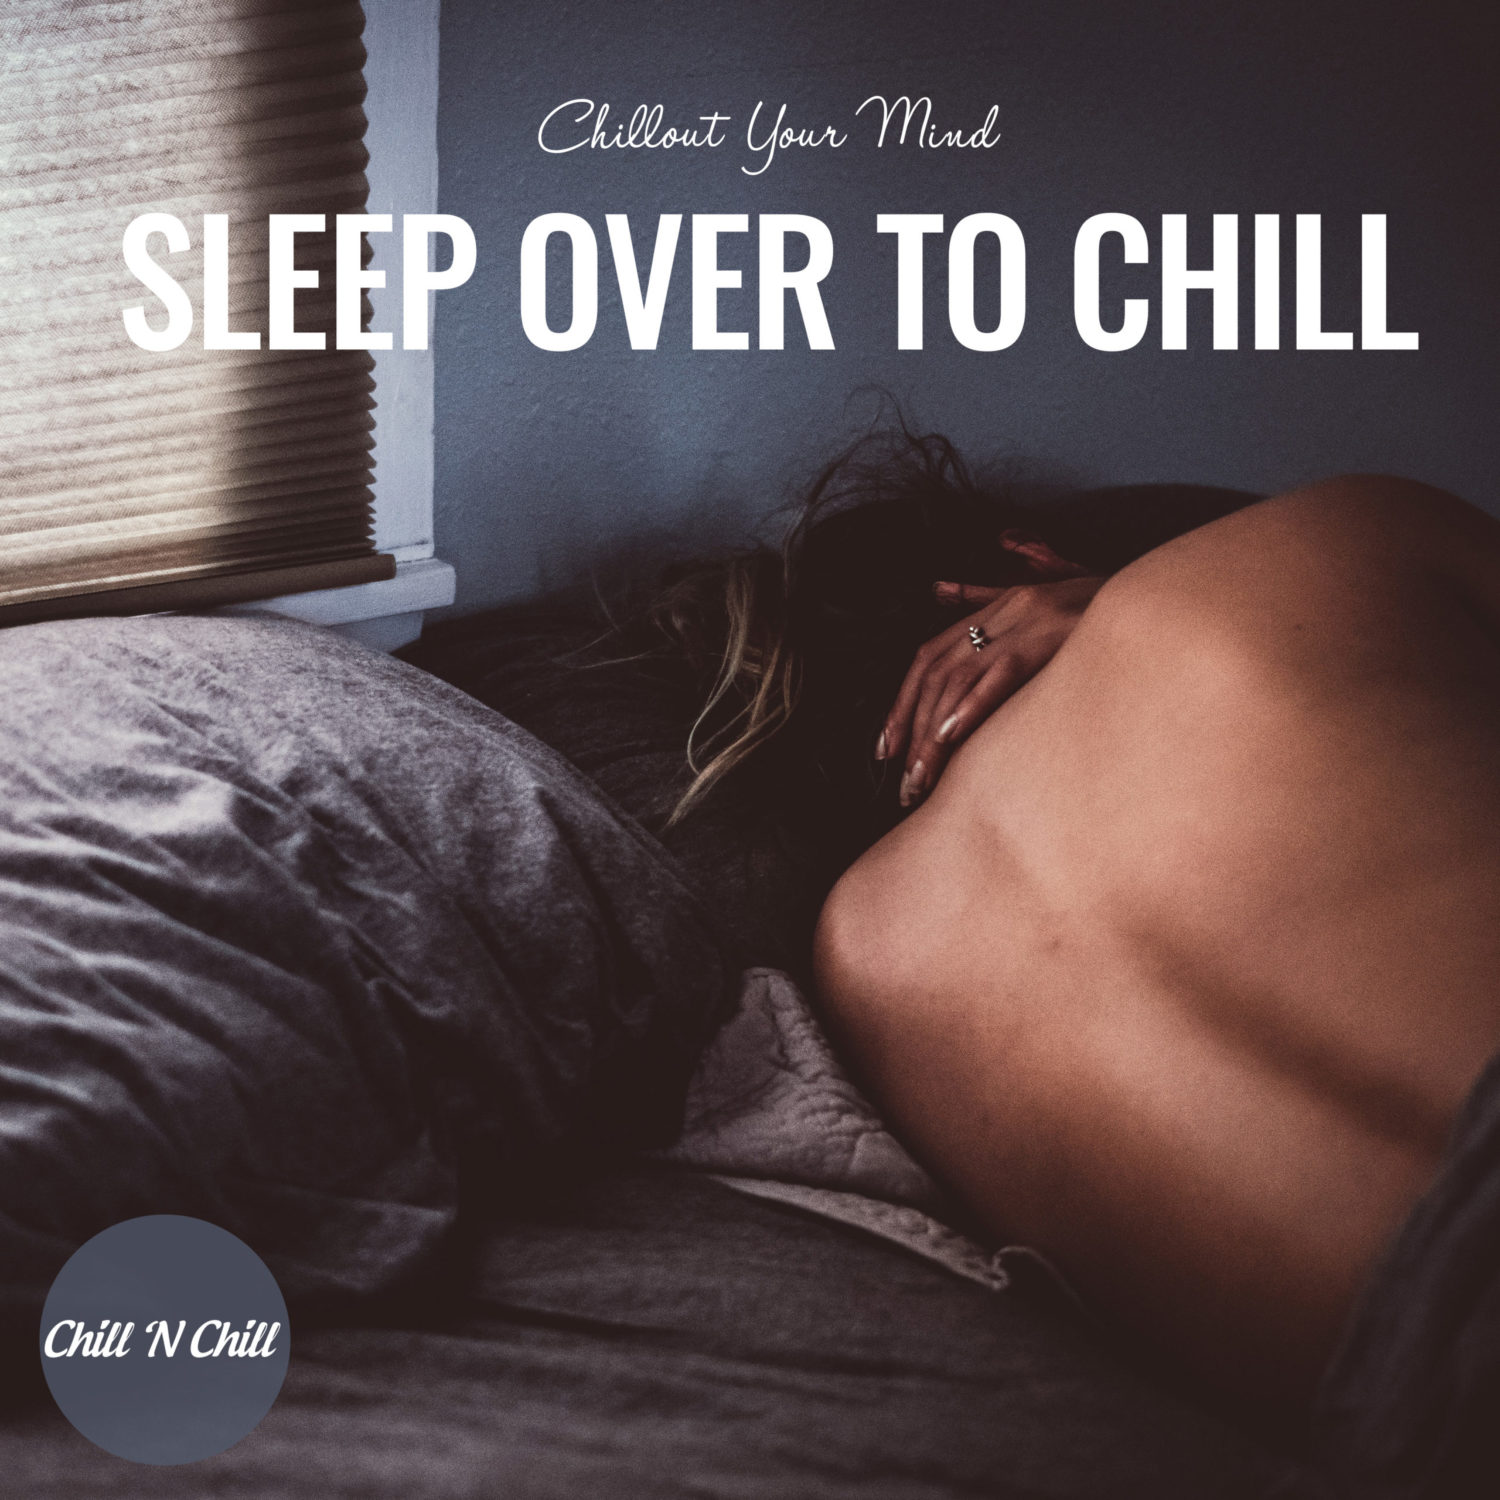 Chill n. Oversleep over. Chill your Mind. Over sleeping. Chill Sleep.